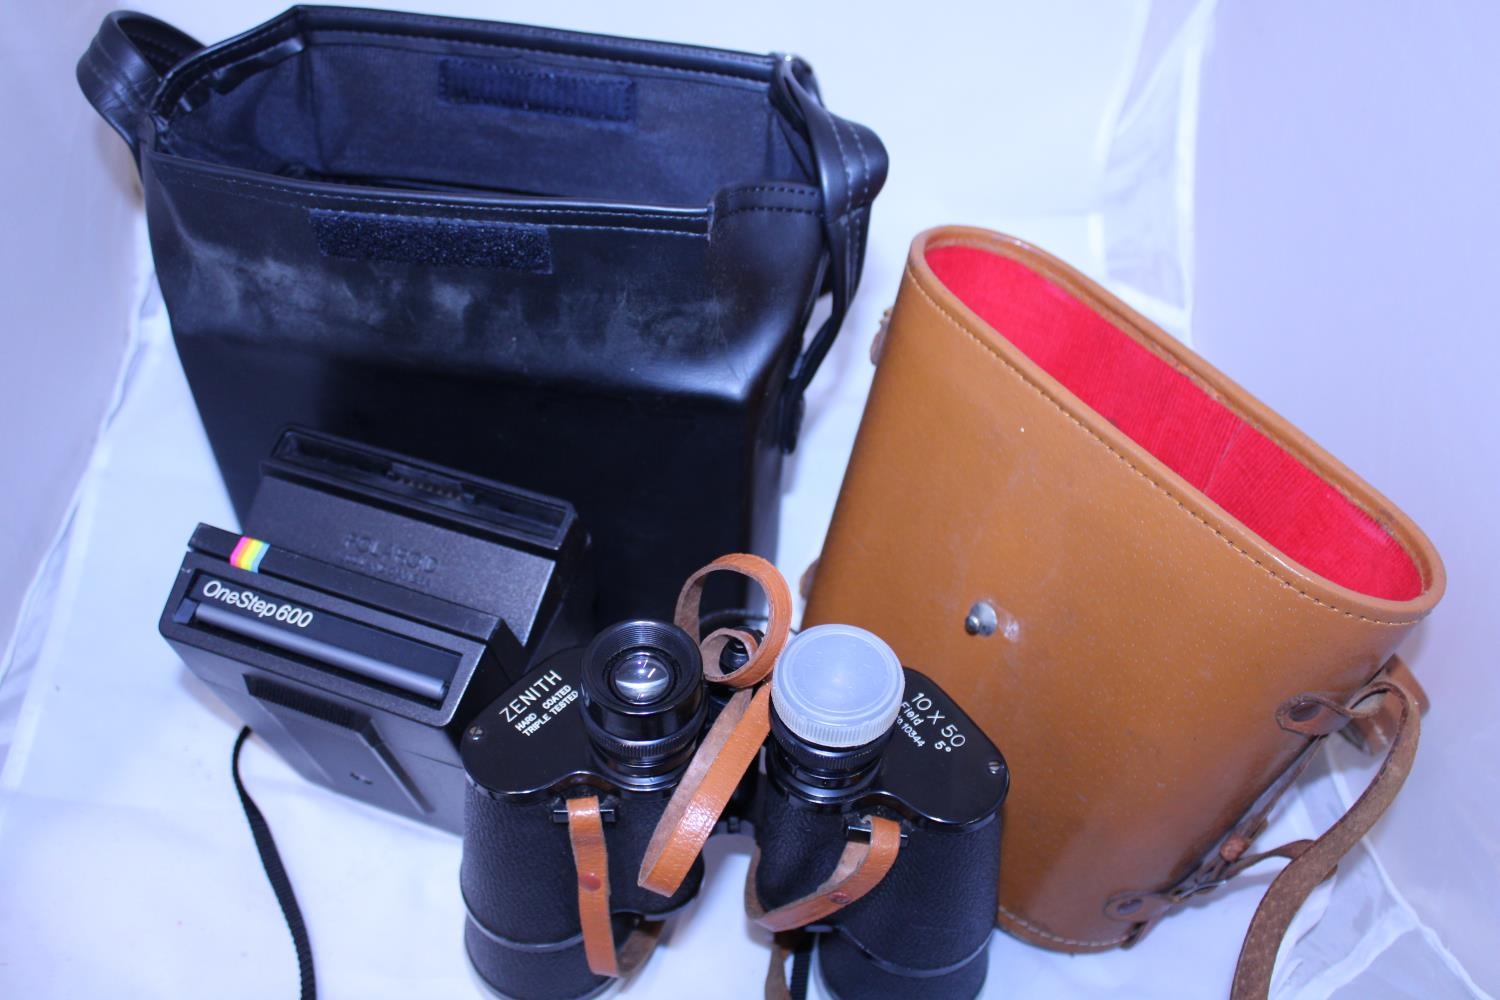 A pair of Zenith field binoculars and a vintage Polaroid camera